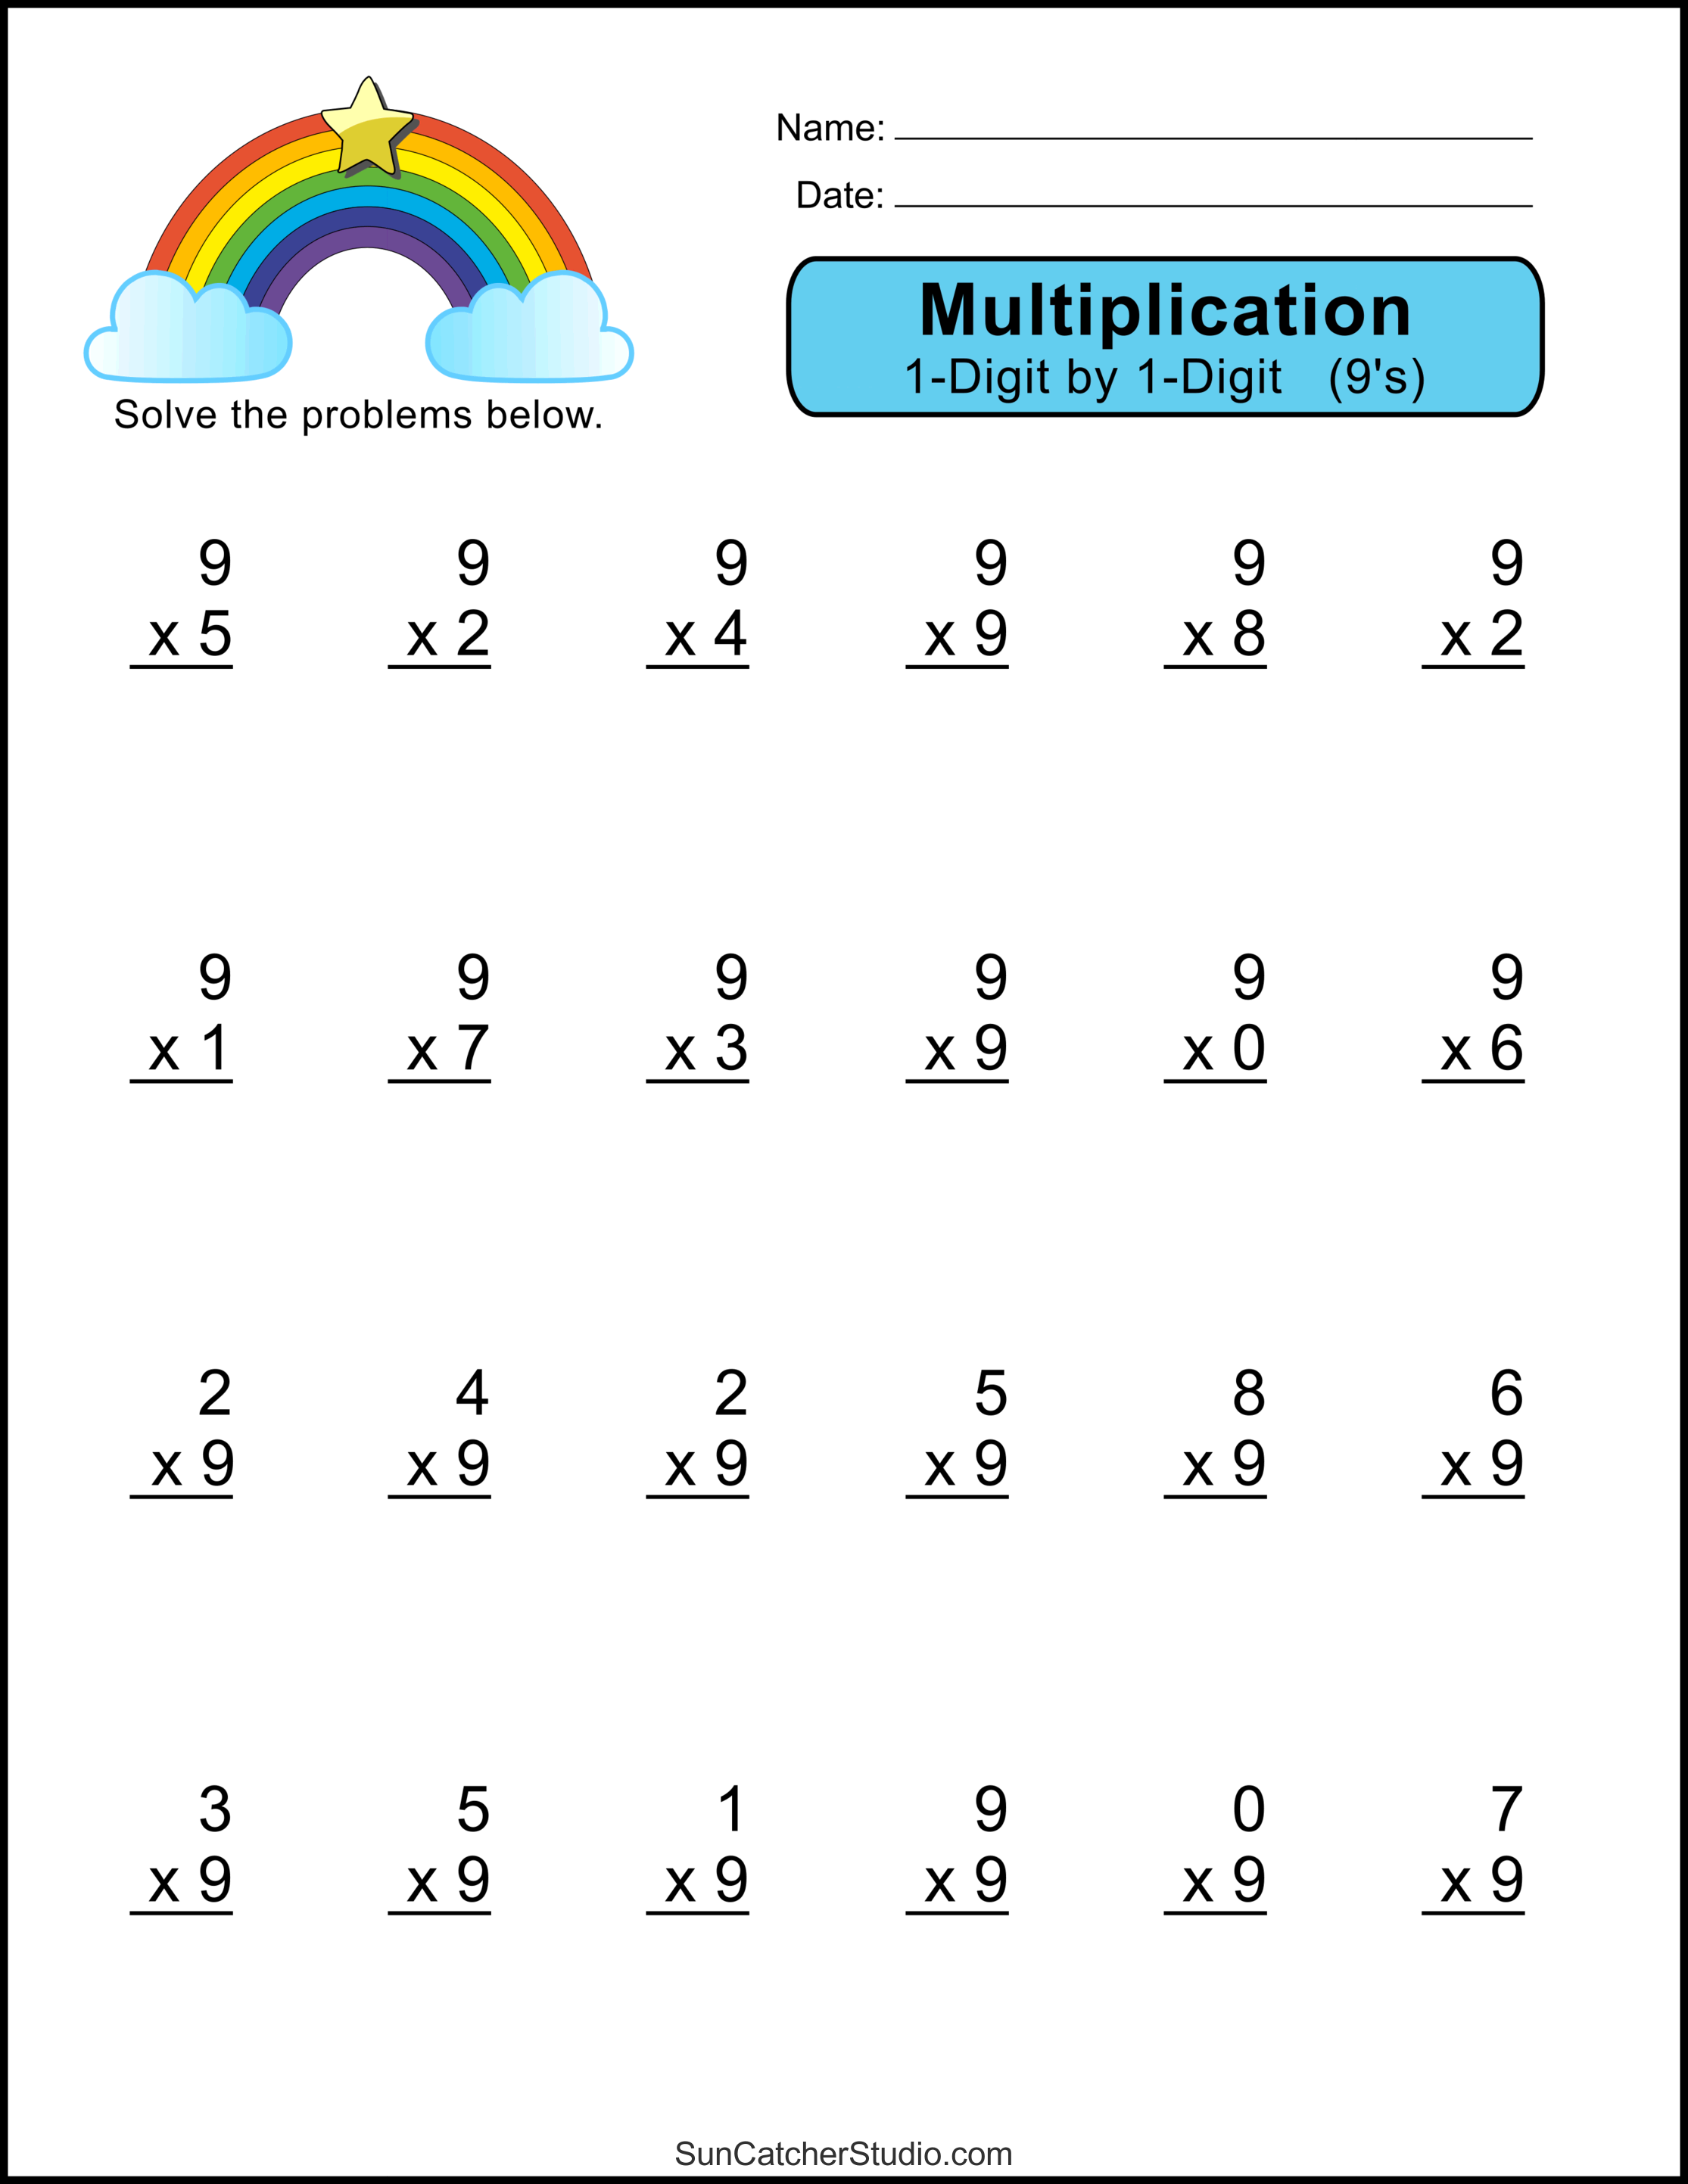 Multiplication Worksheets One Digit Math Drills DIY Projects Patterns Monograms Designs 